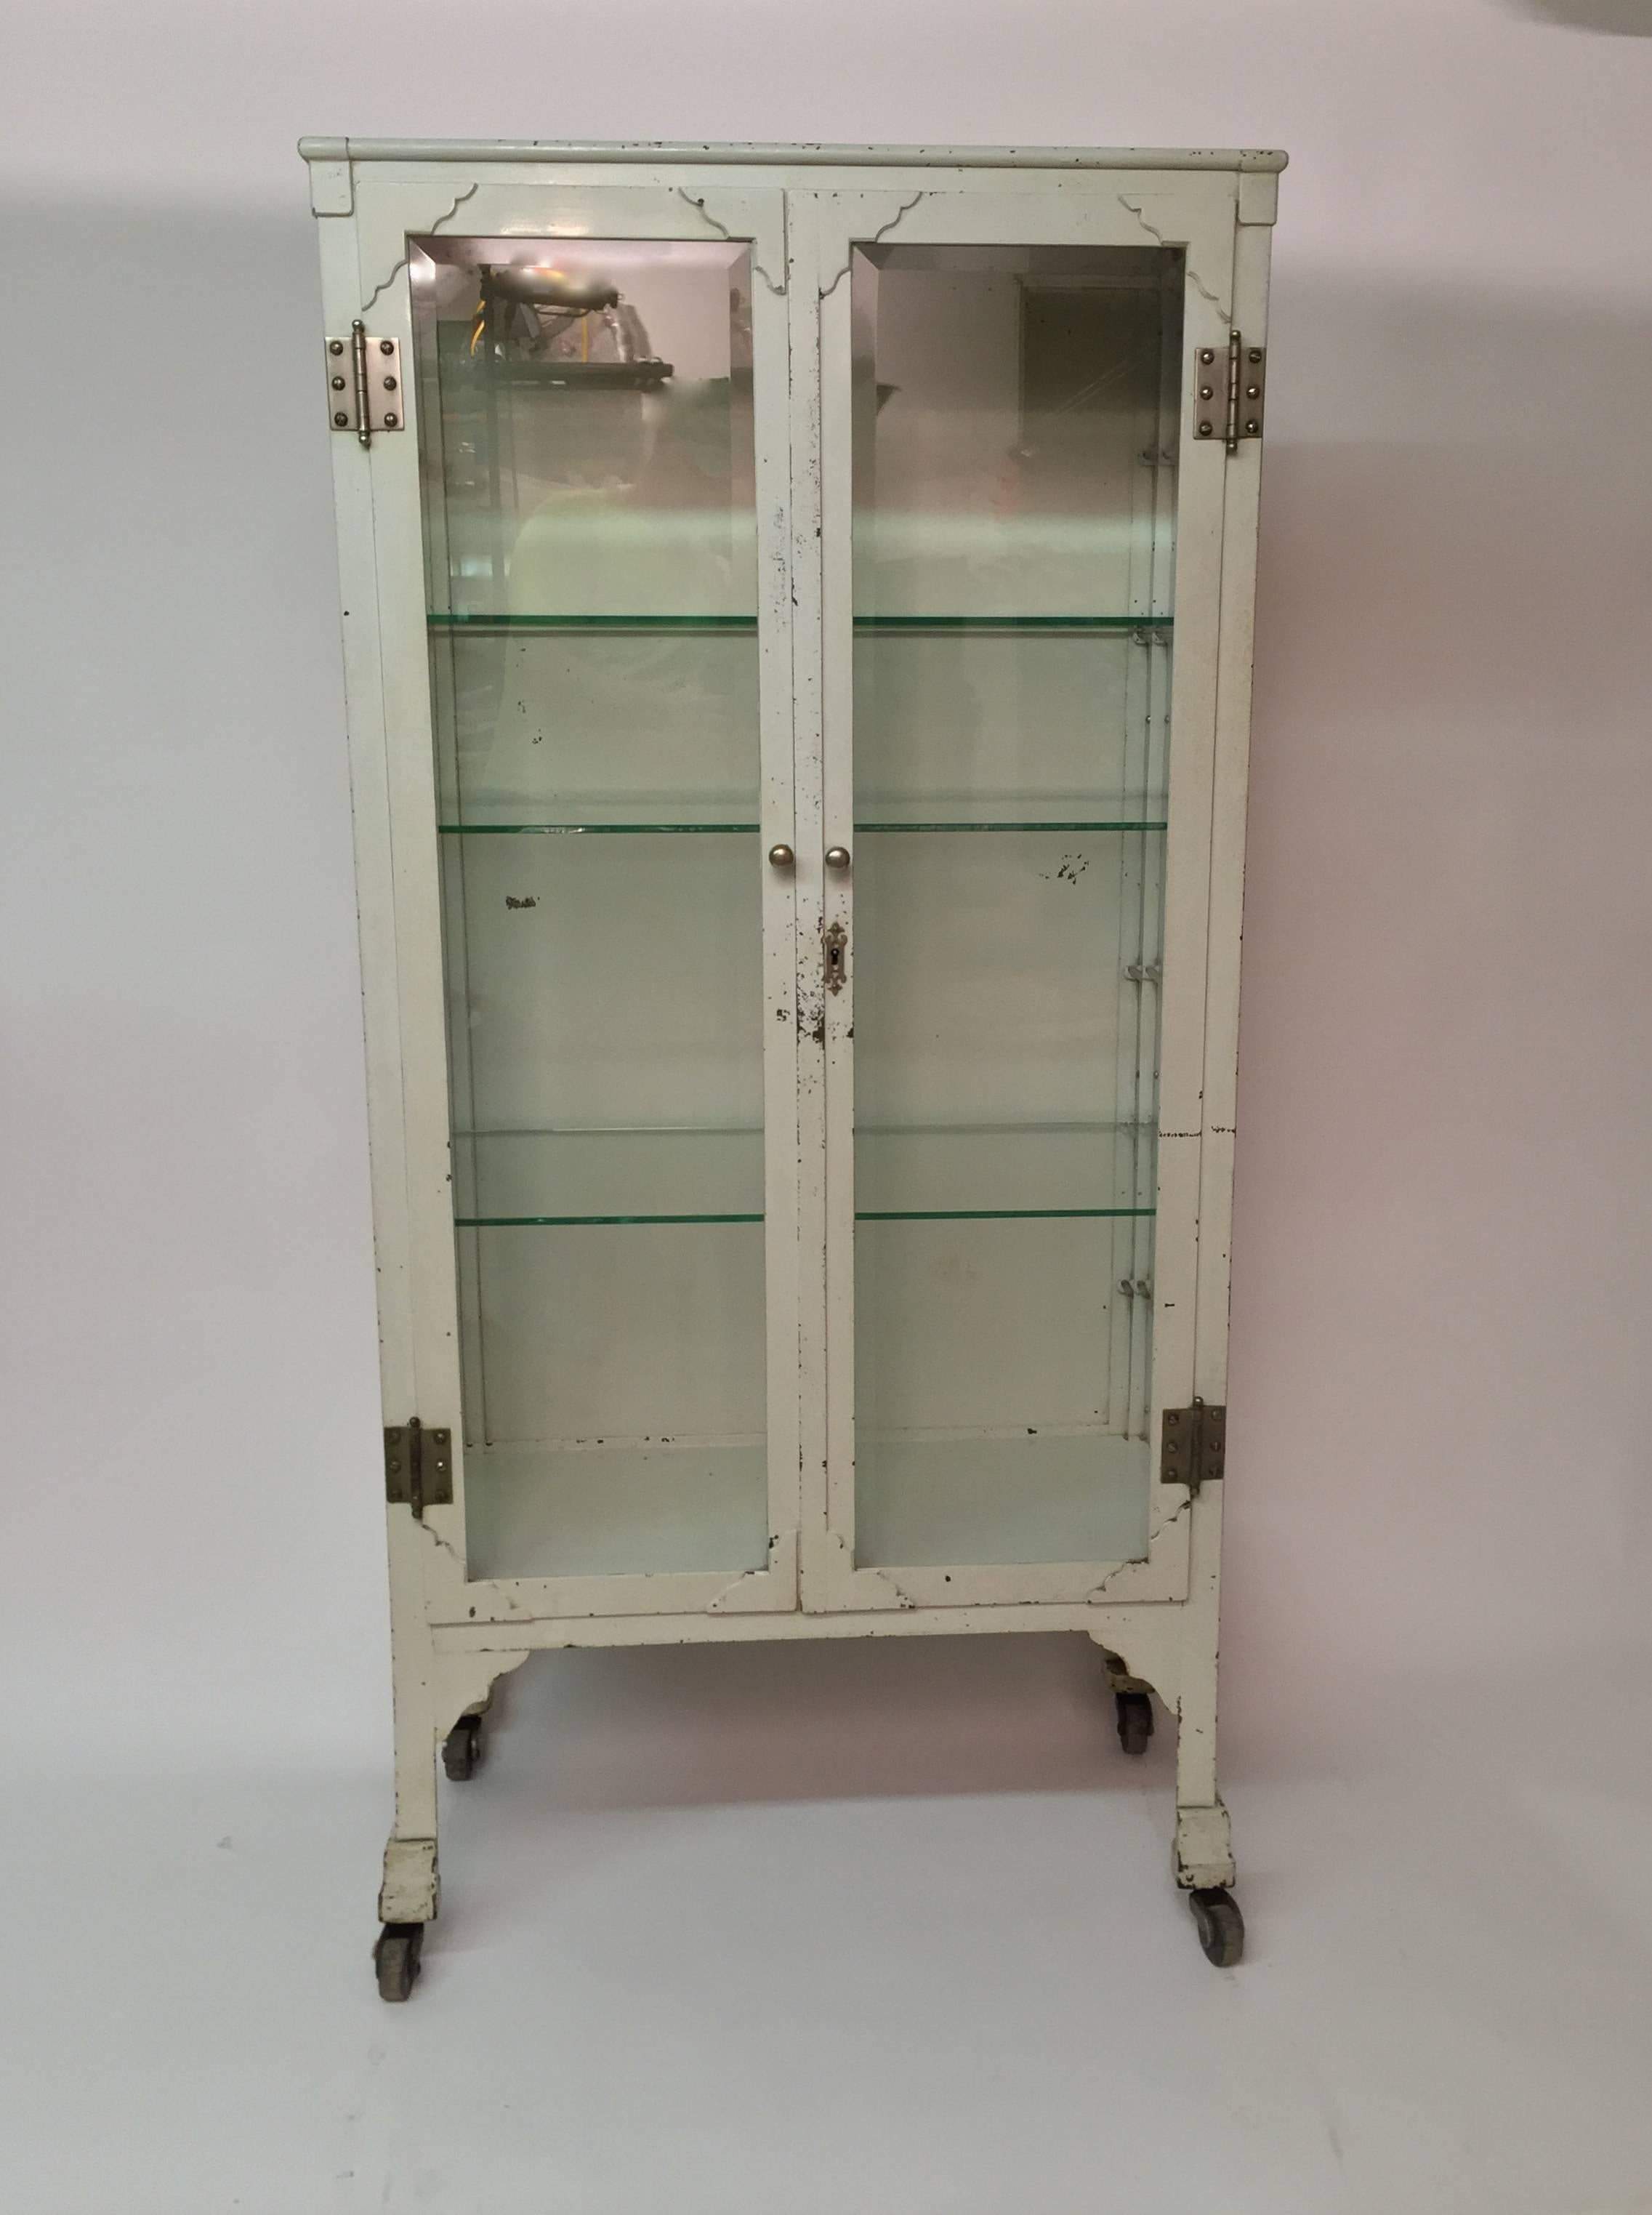 Amazing display showcase or display cabinet. The steel case cabinet retains the four original bevel glass panels, six original glass shelves (green edge) and the key. Four hard rubber casters and nickel hardware,

circa 1920-1930.